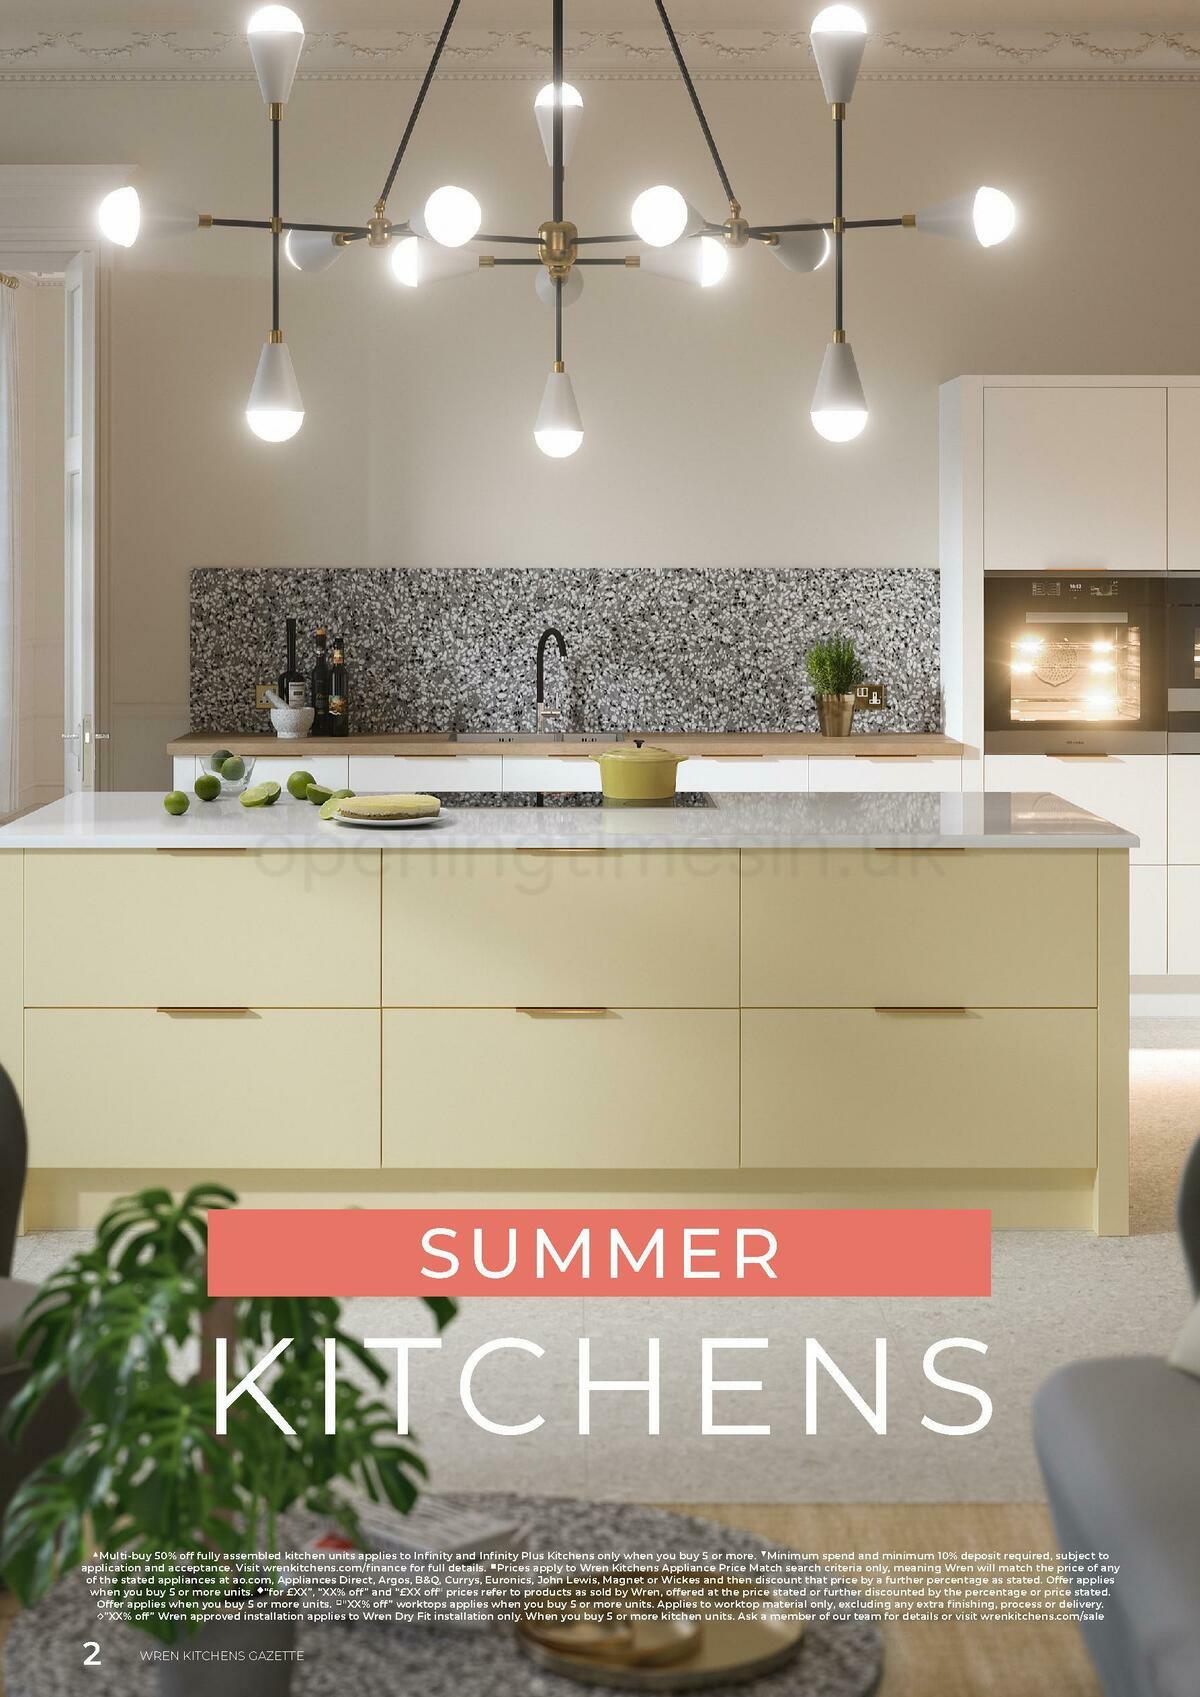 Wren Kitchens Offers from 10 June